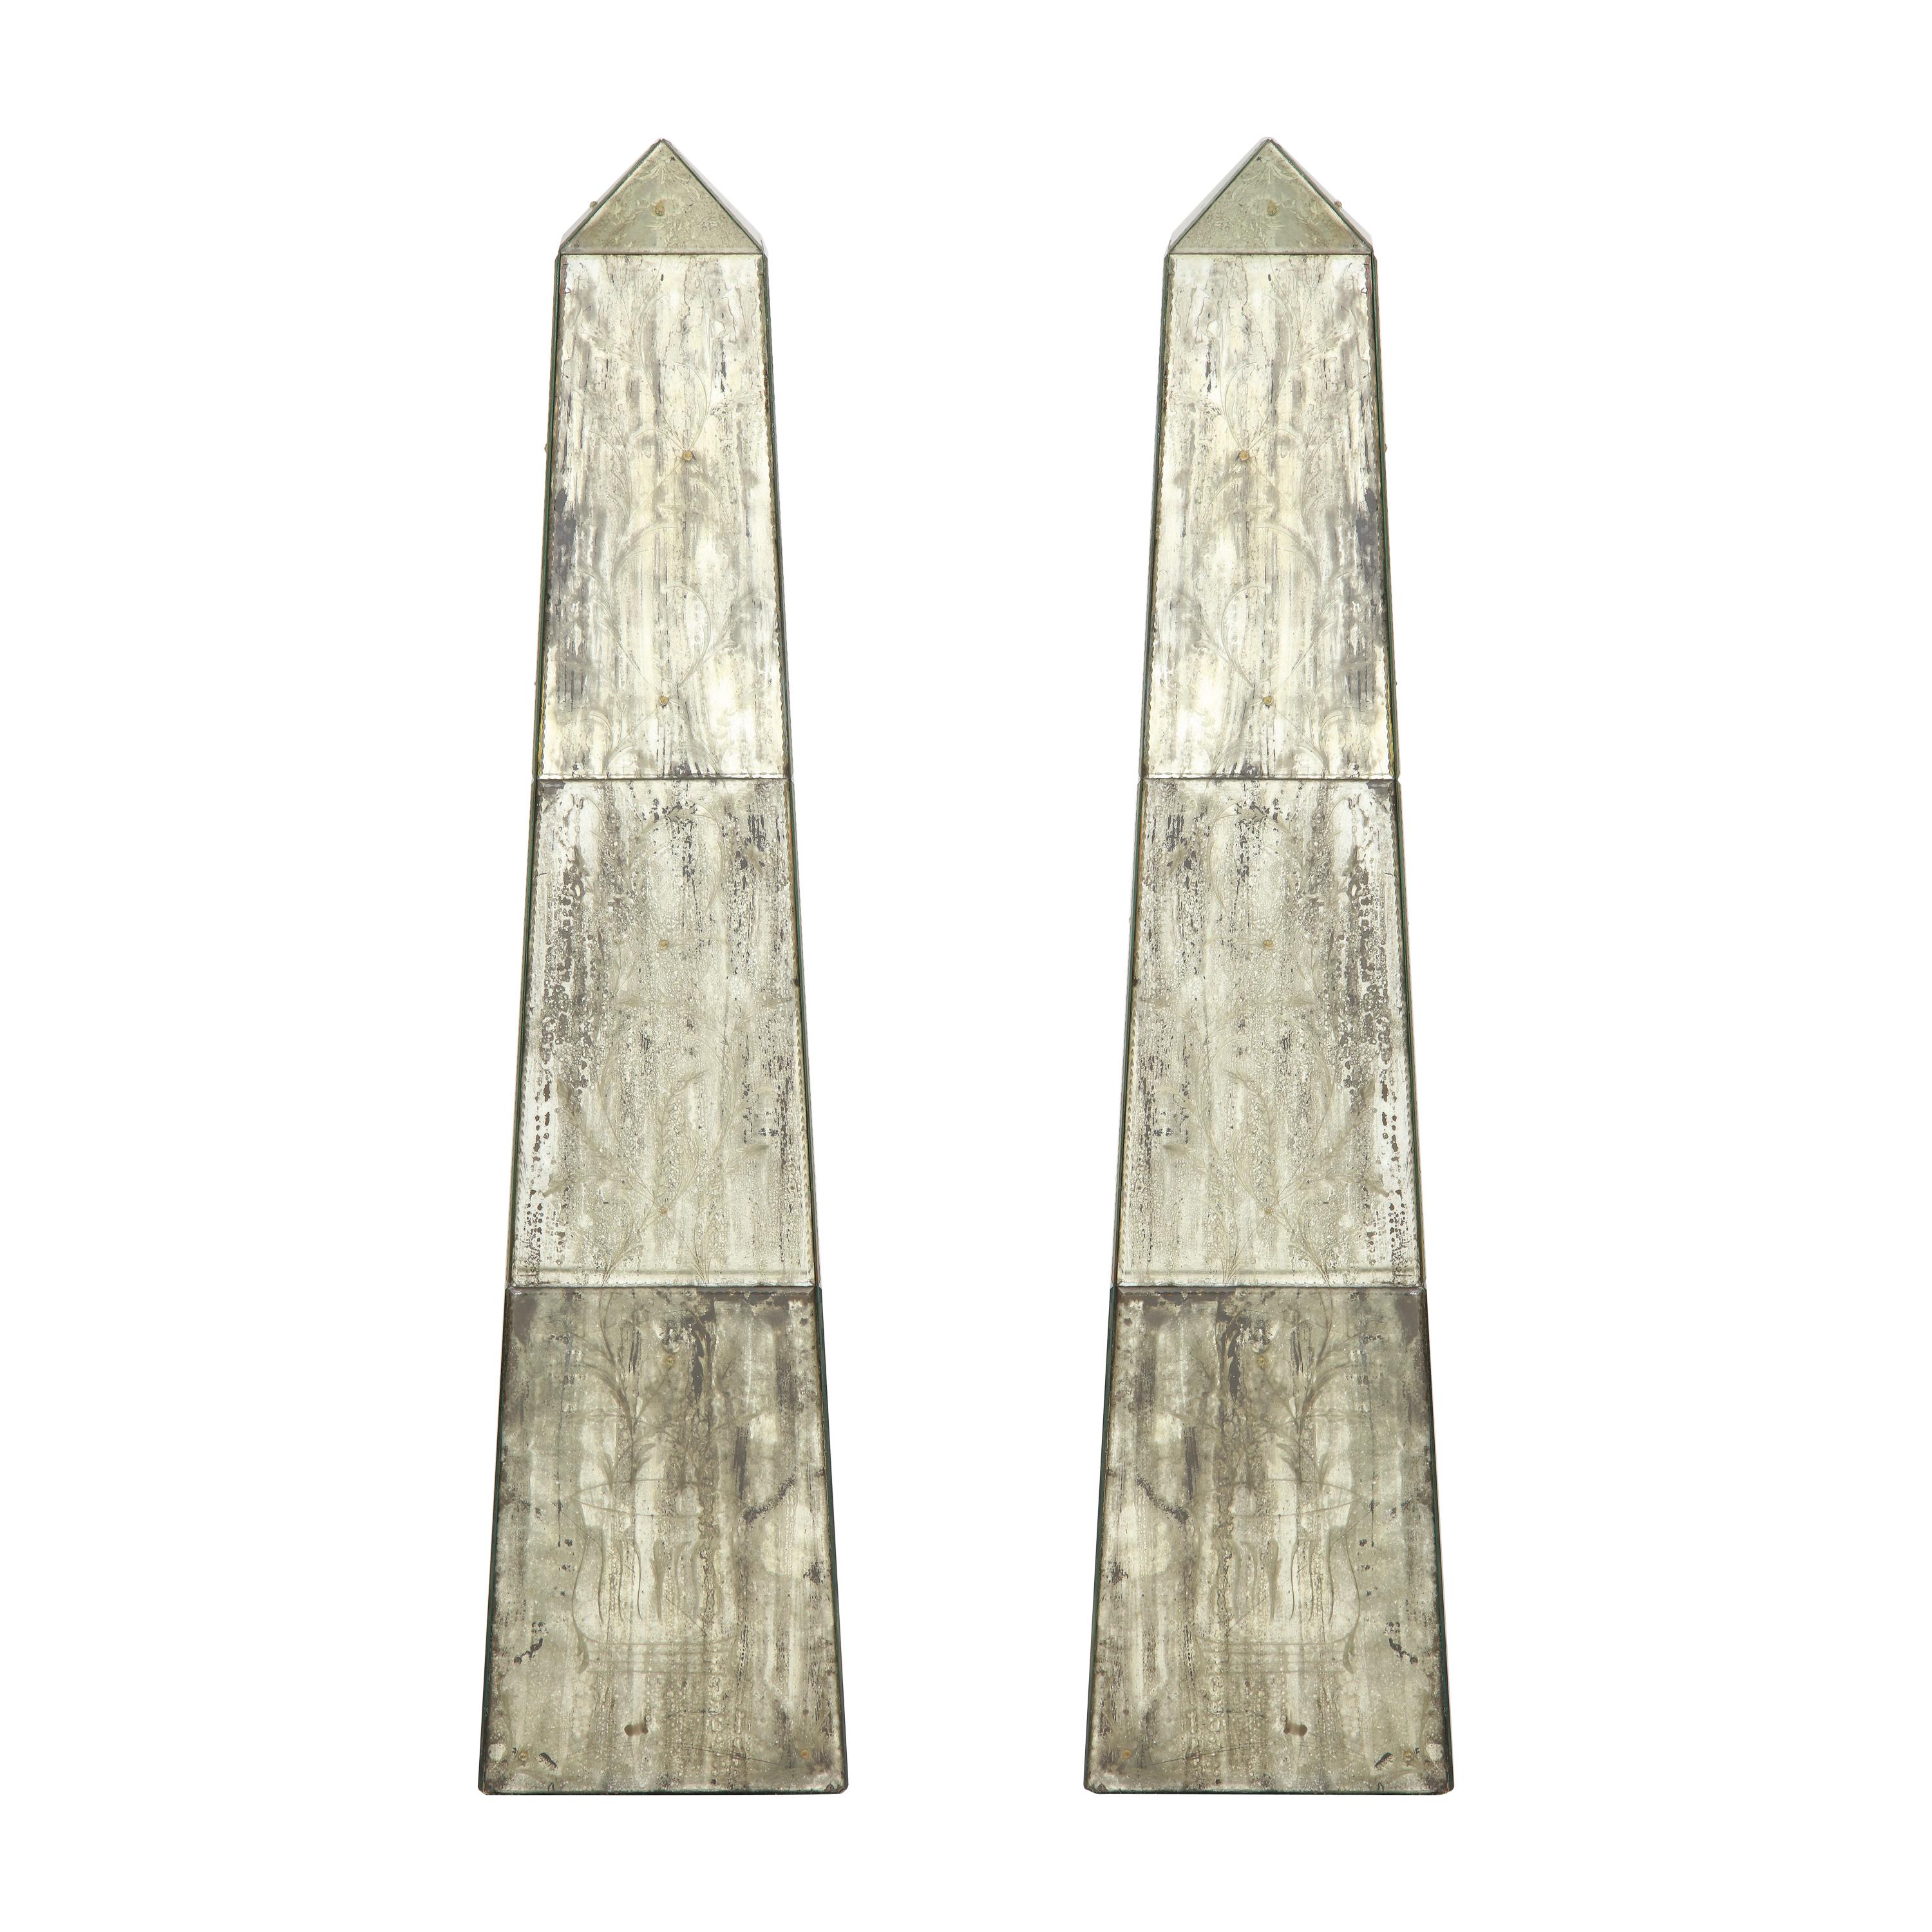 Pair of Tall Mirrored Obelisks with Etched Floral Design For Sale